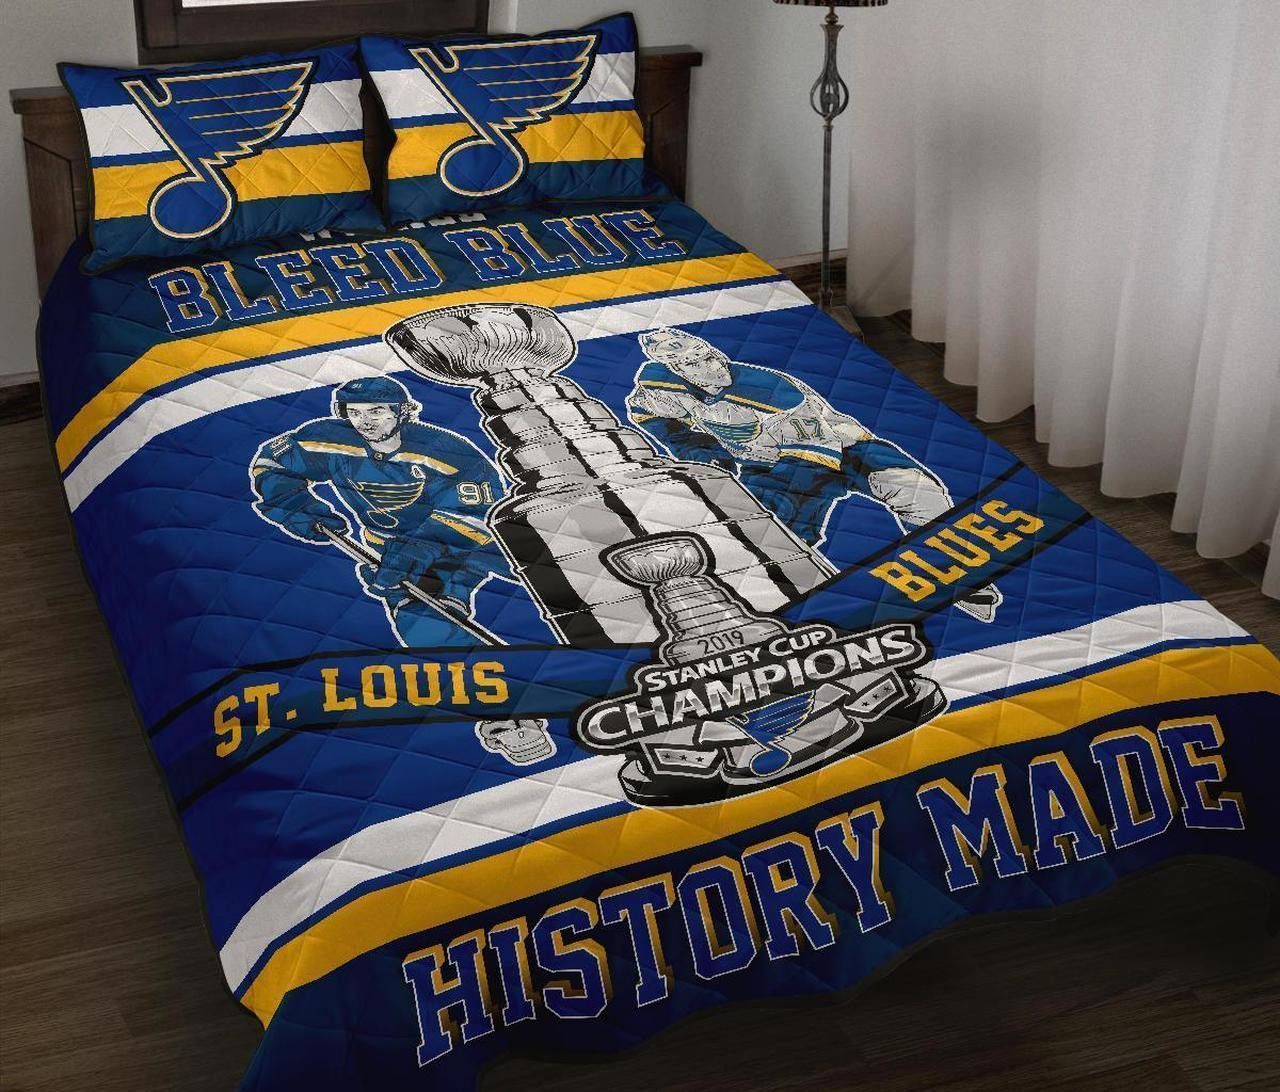 St Louis Blues History Made Customize Duvet Cover Bedding Set